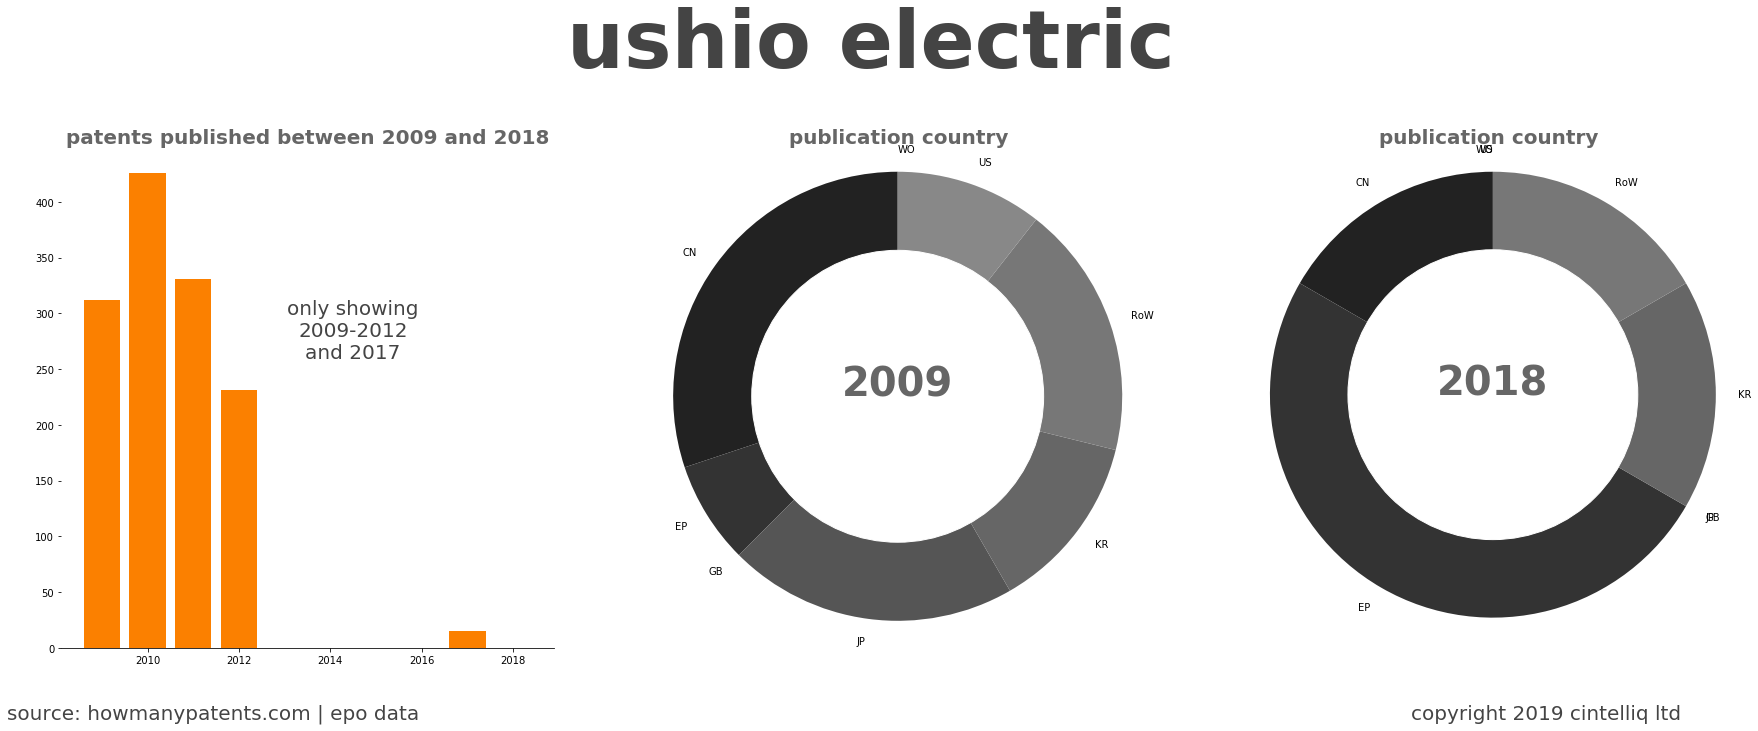 summary of patents for Ushio Electric